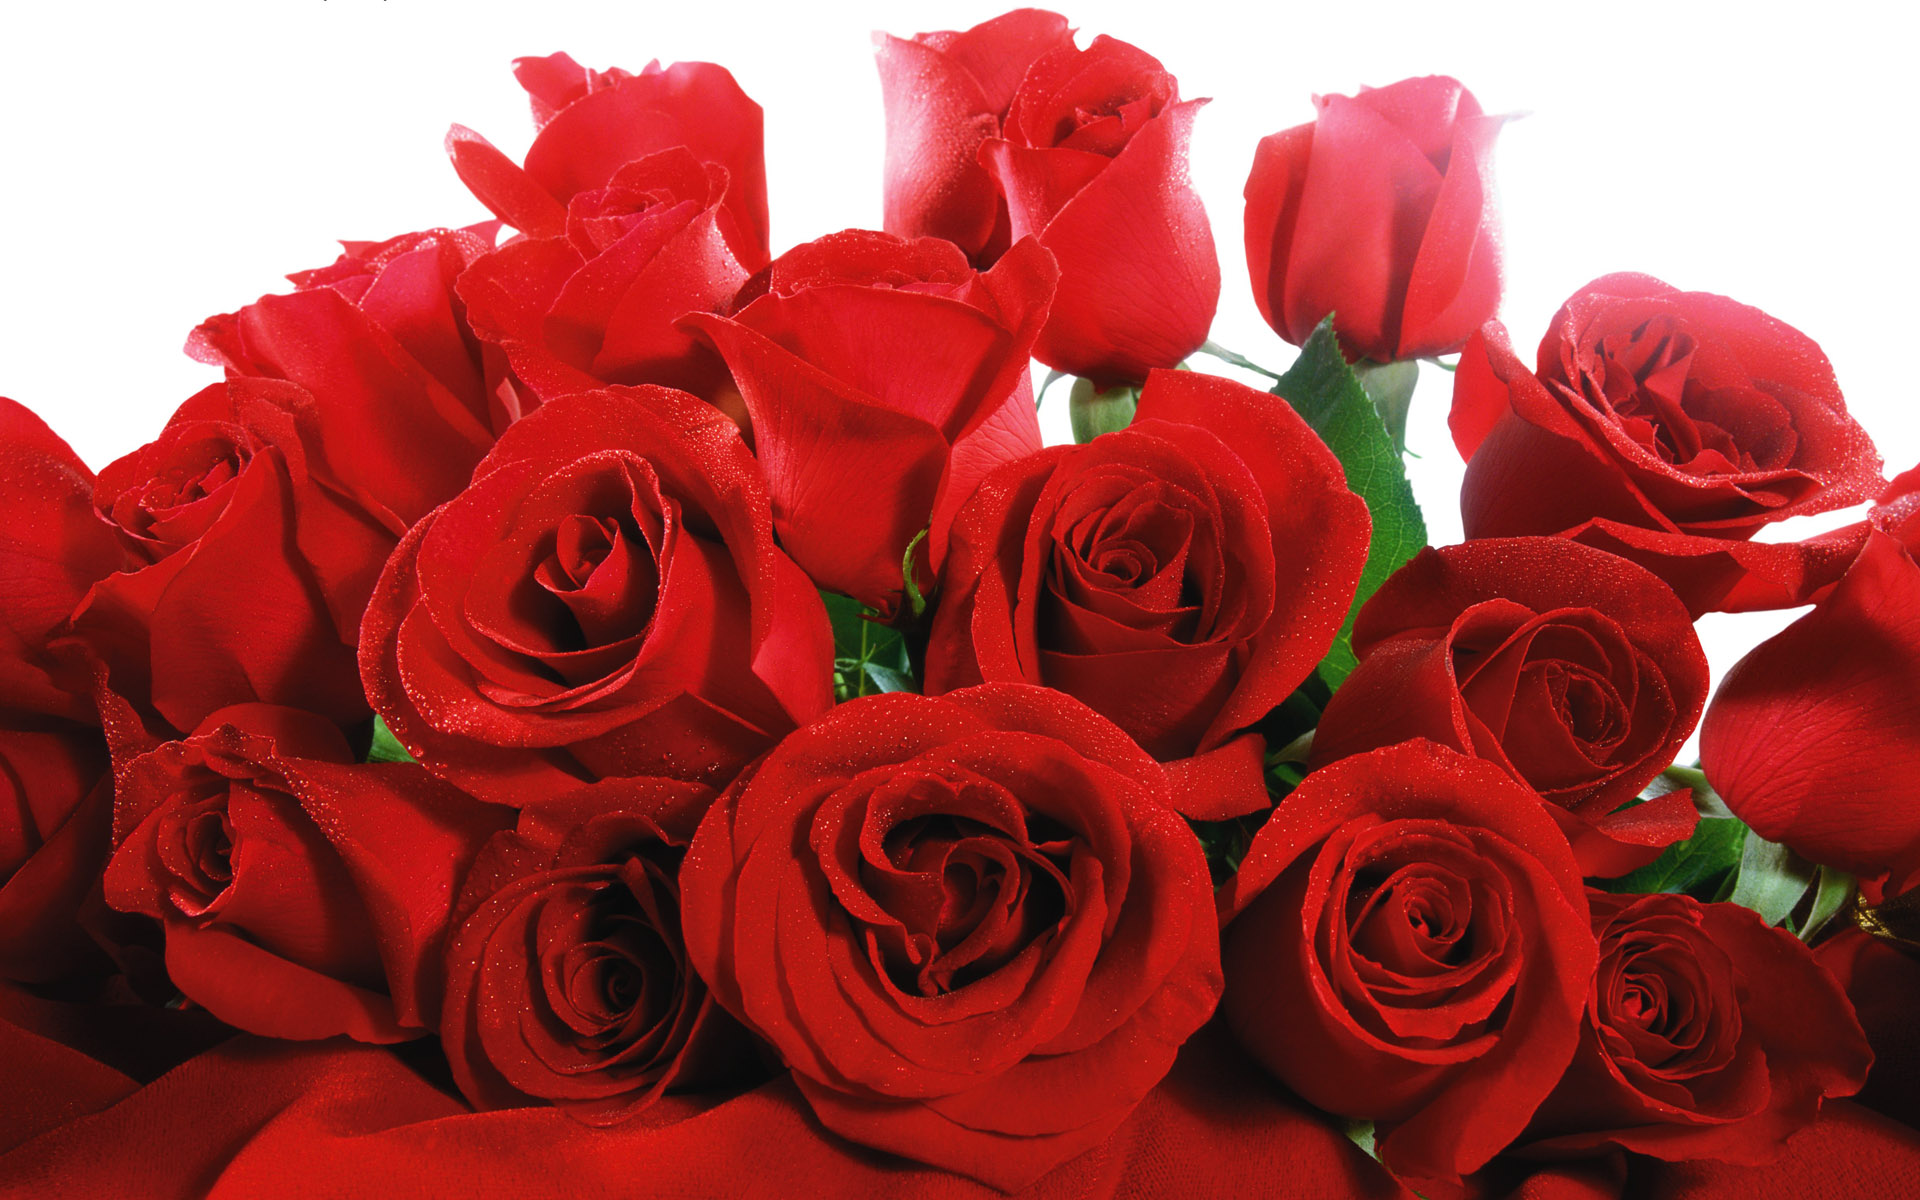 Previous, Nature - Flowers - Red Valentines, Flowers wallpaper